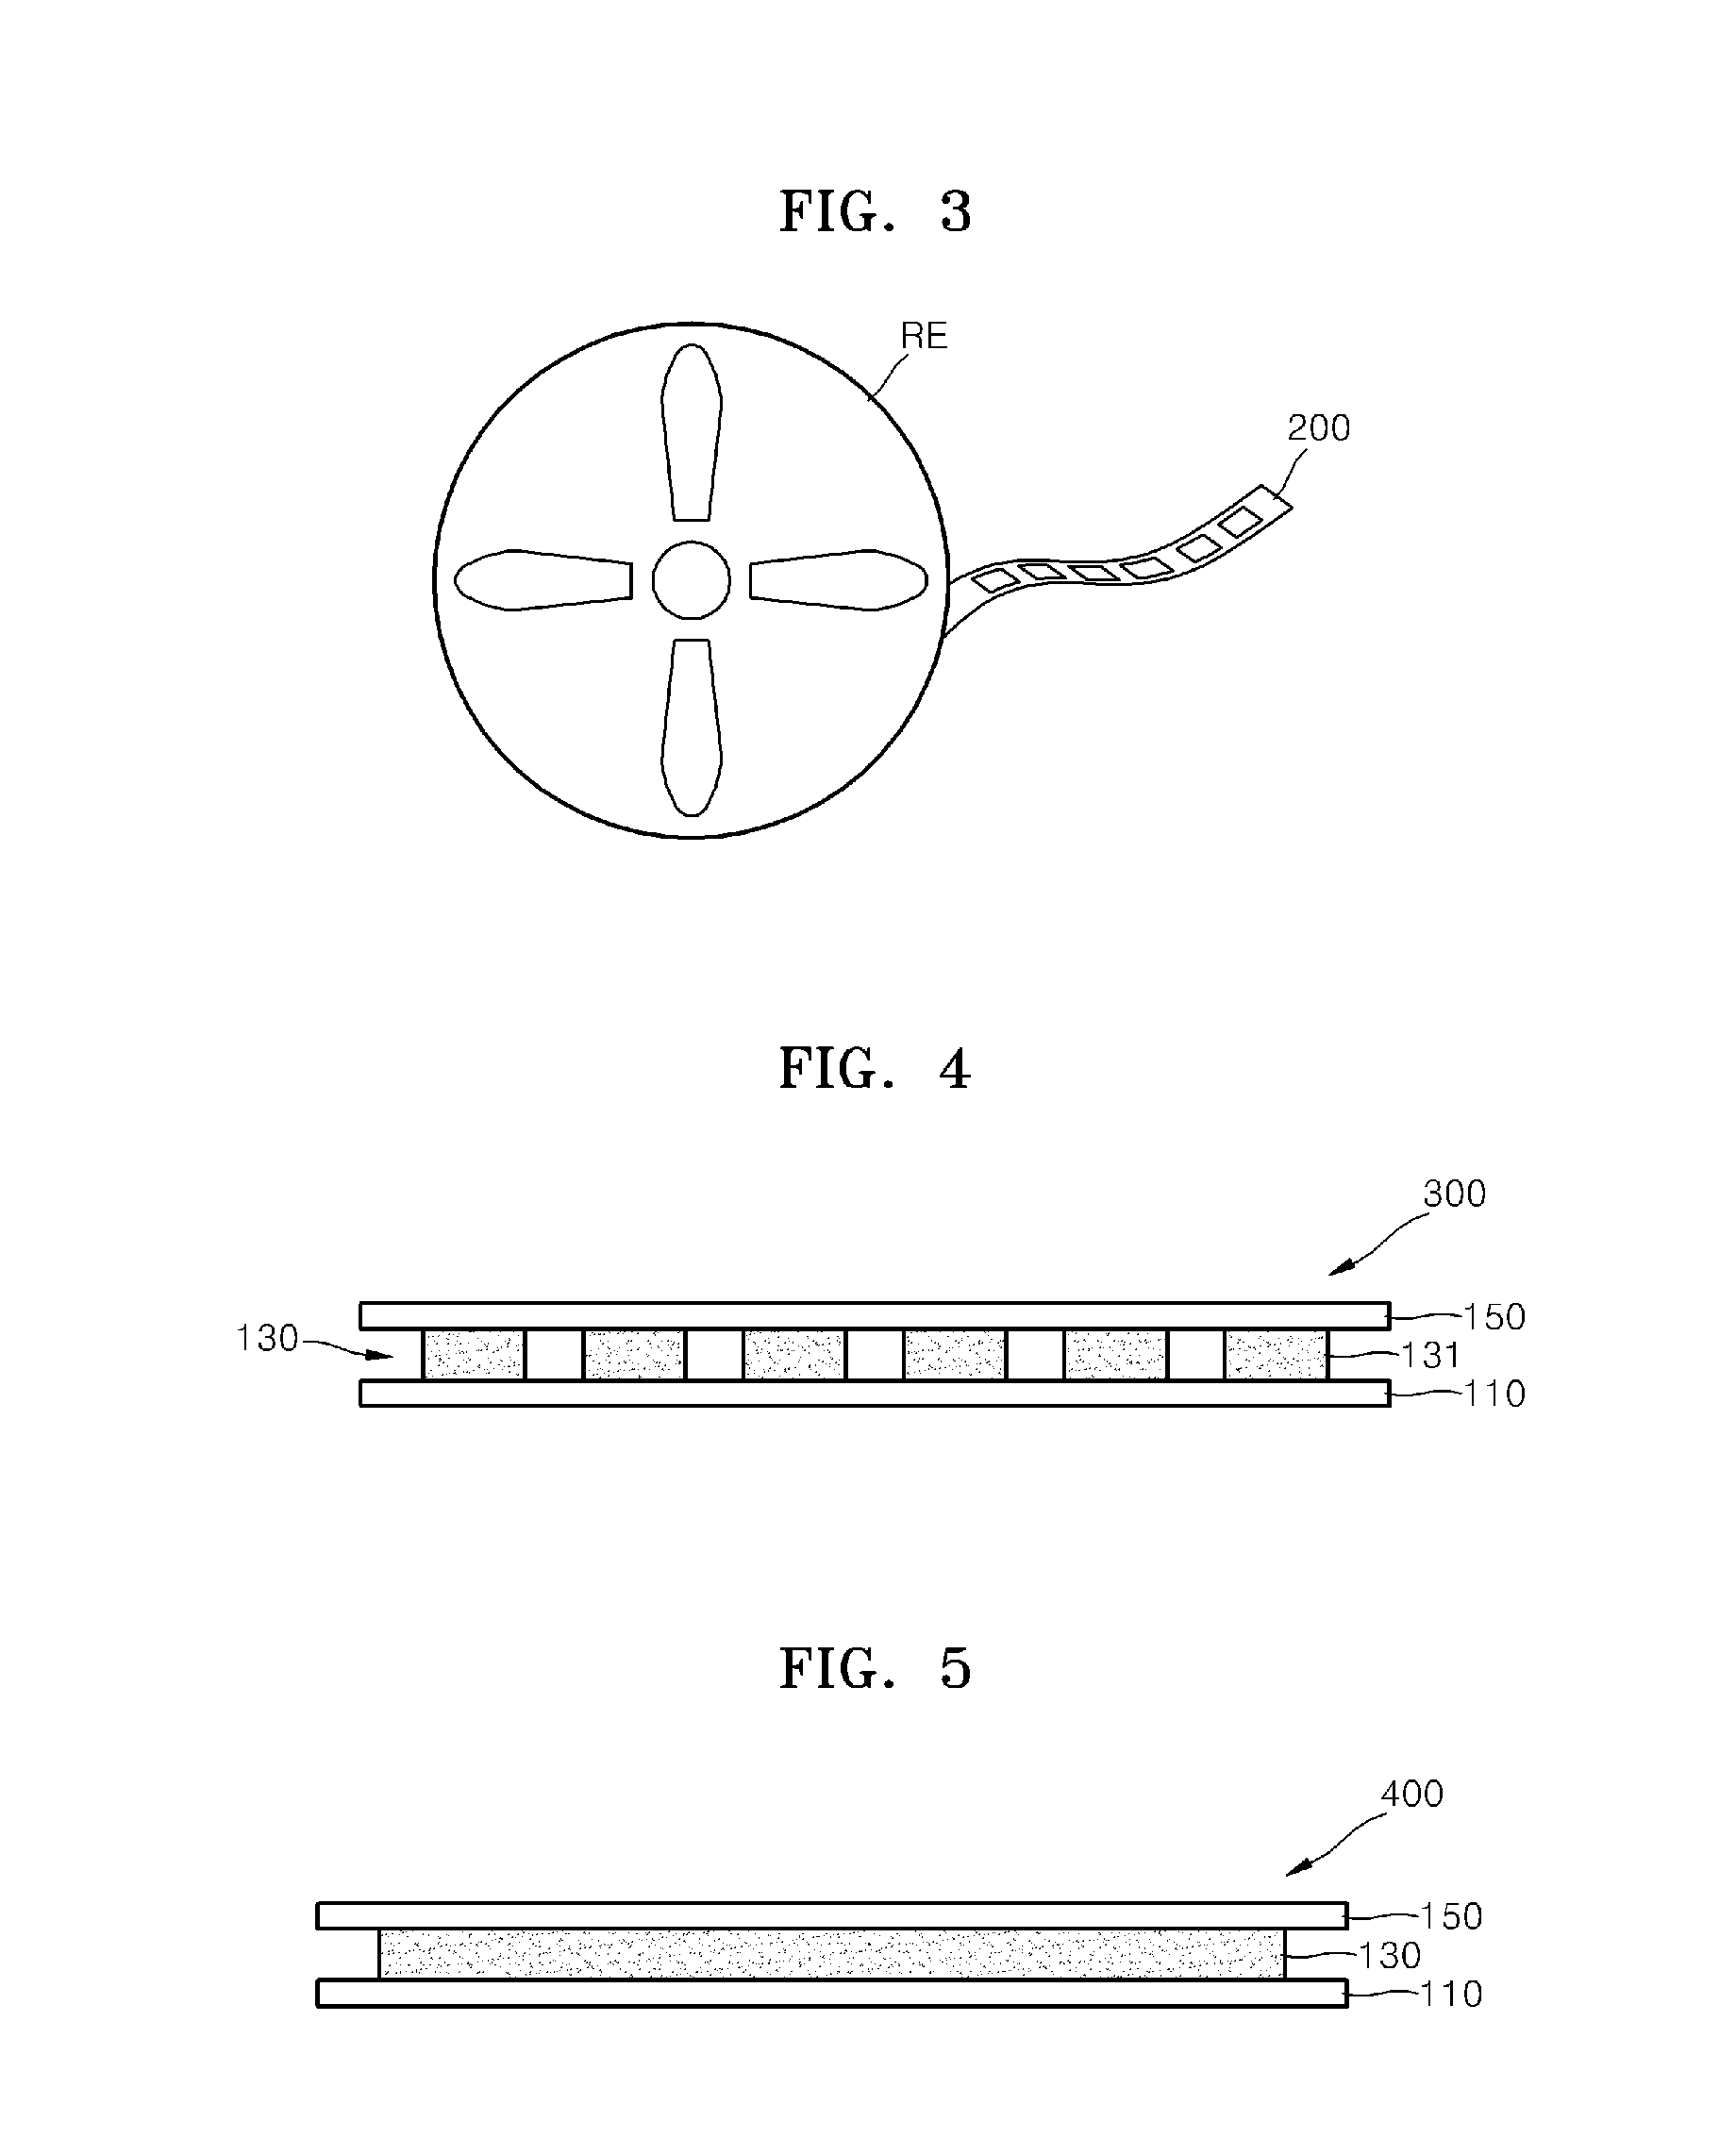 Phosphor film, method of forming the same, and method of coating phosphor layer on LED chips